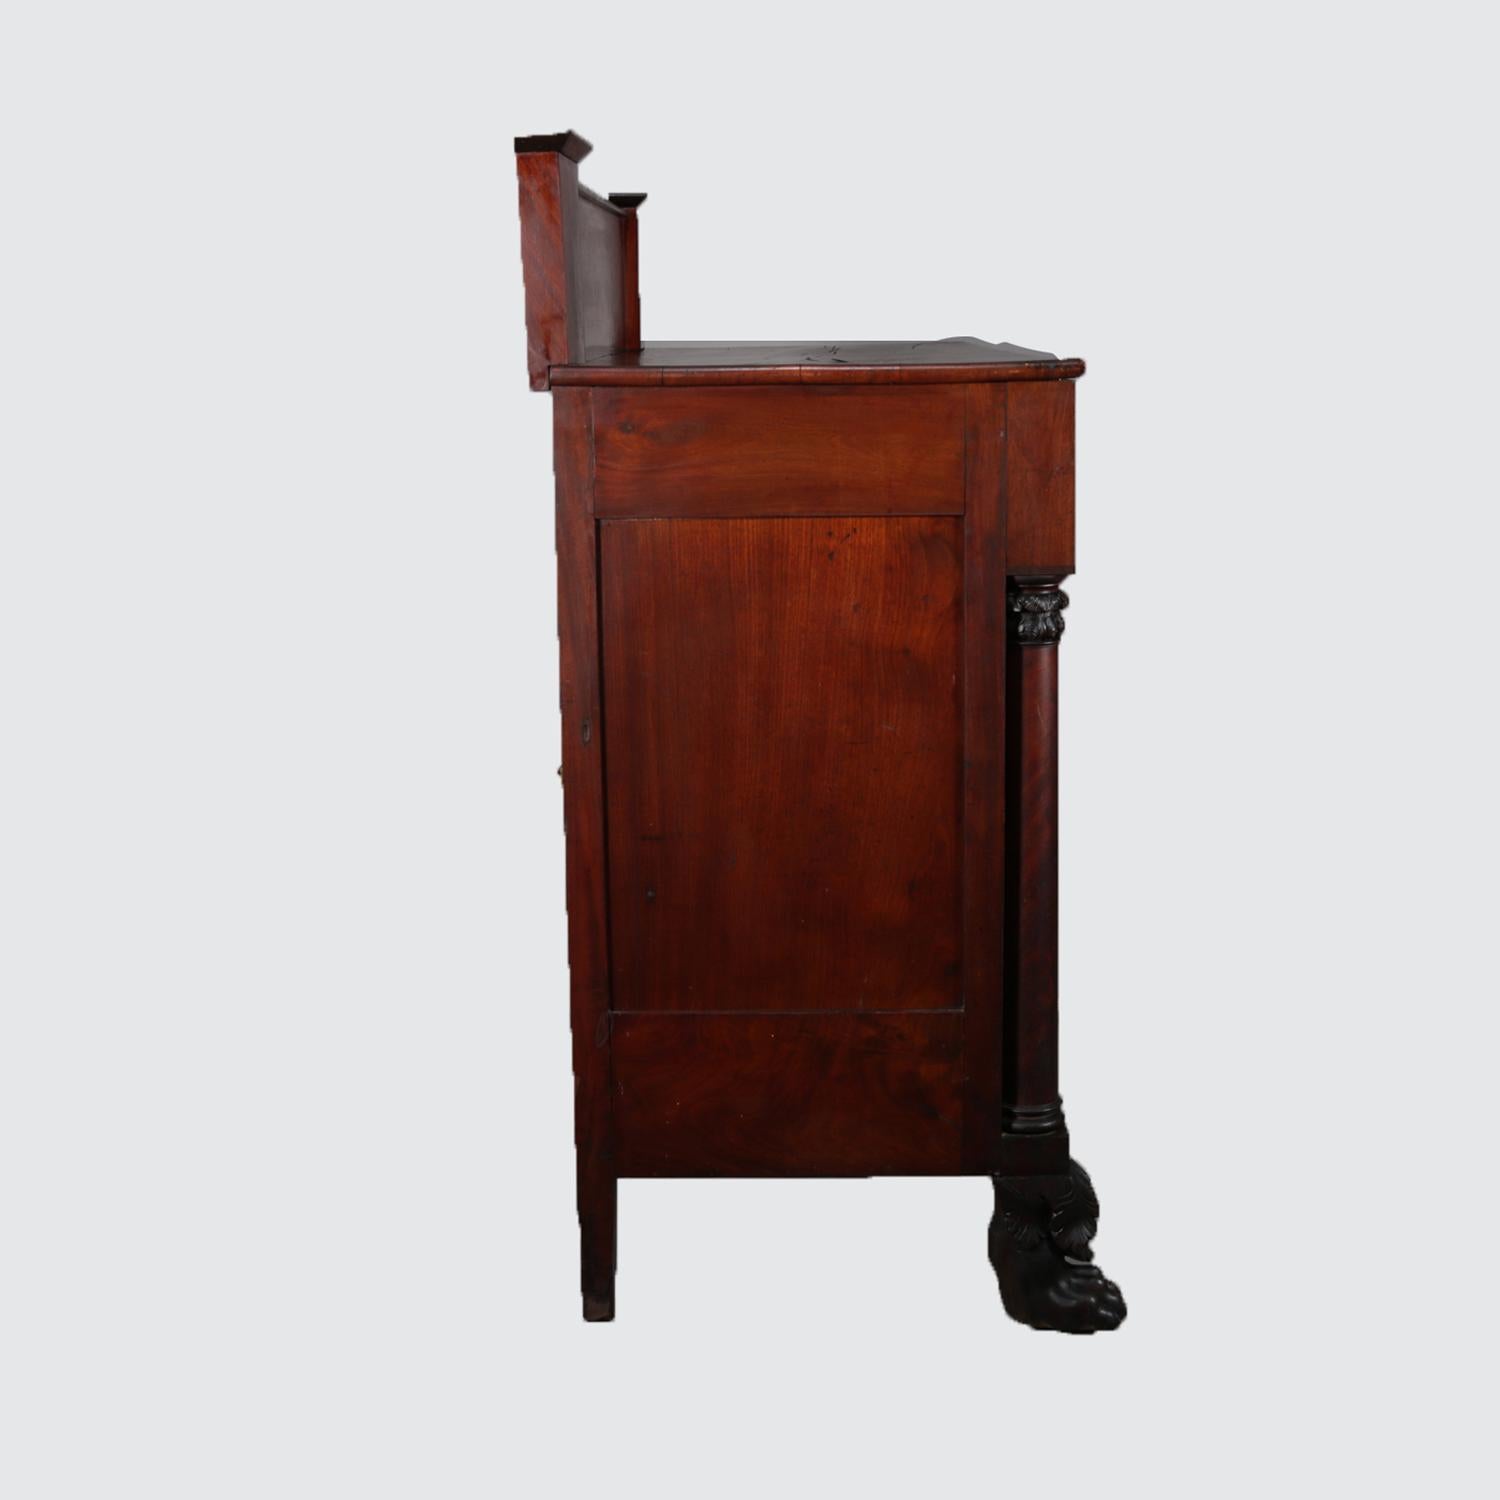 19th Century Antique Classical American Empire Carved Flame Mahogany Sideboard, circa 1830